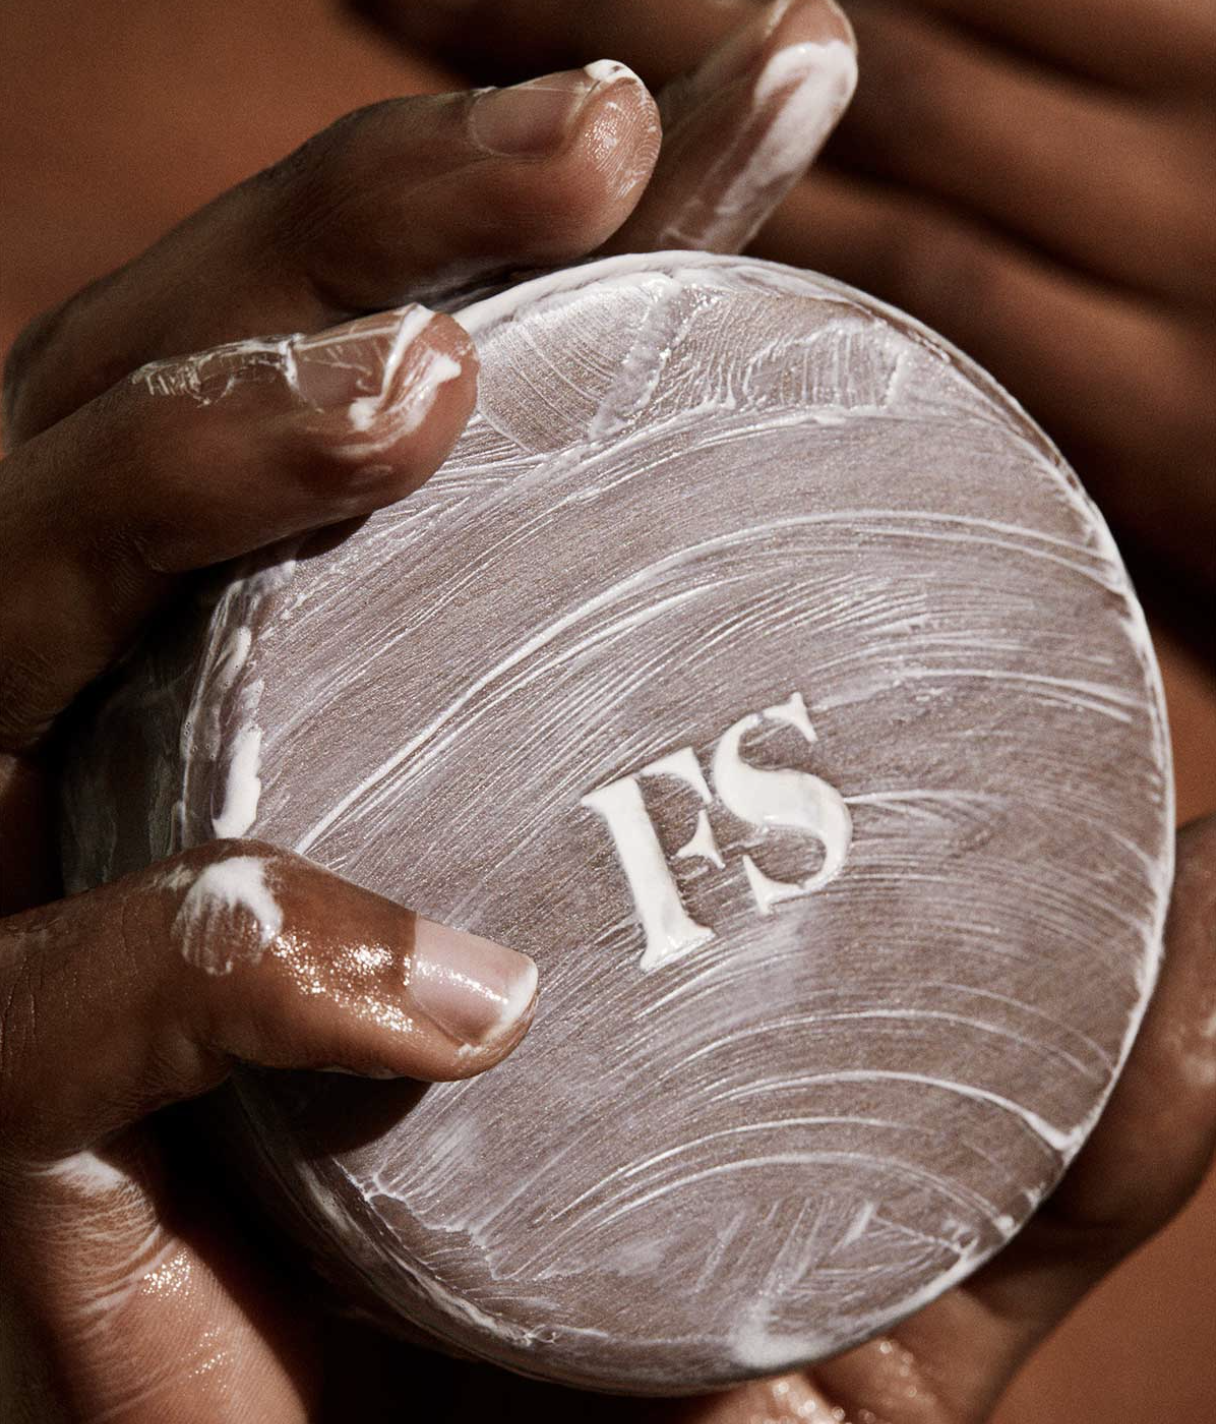 A person holding the cleansing bar